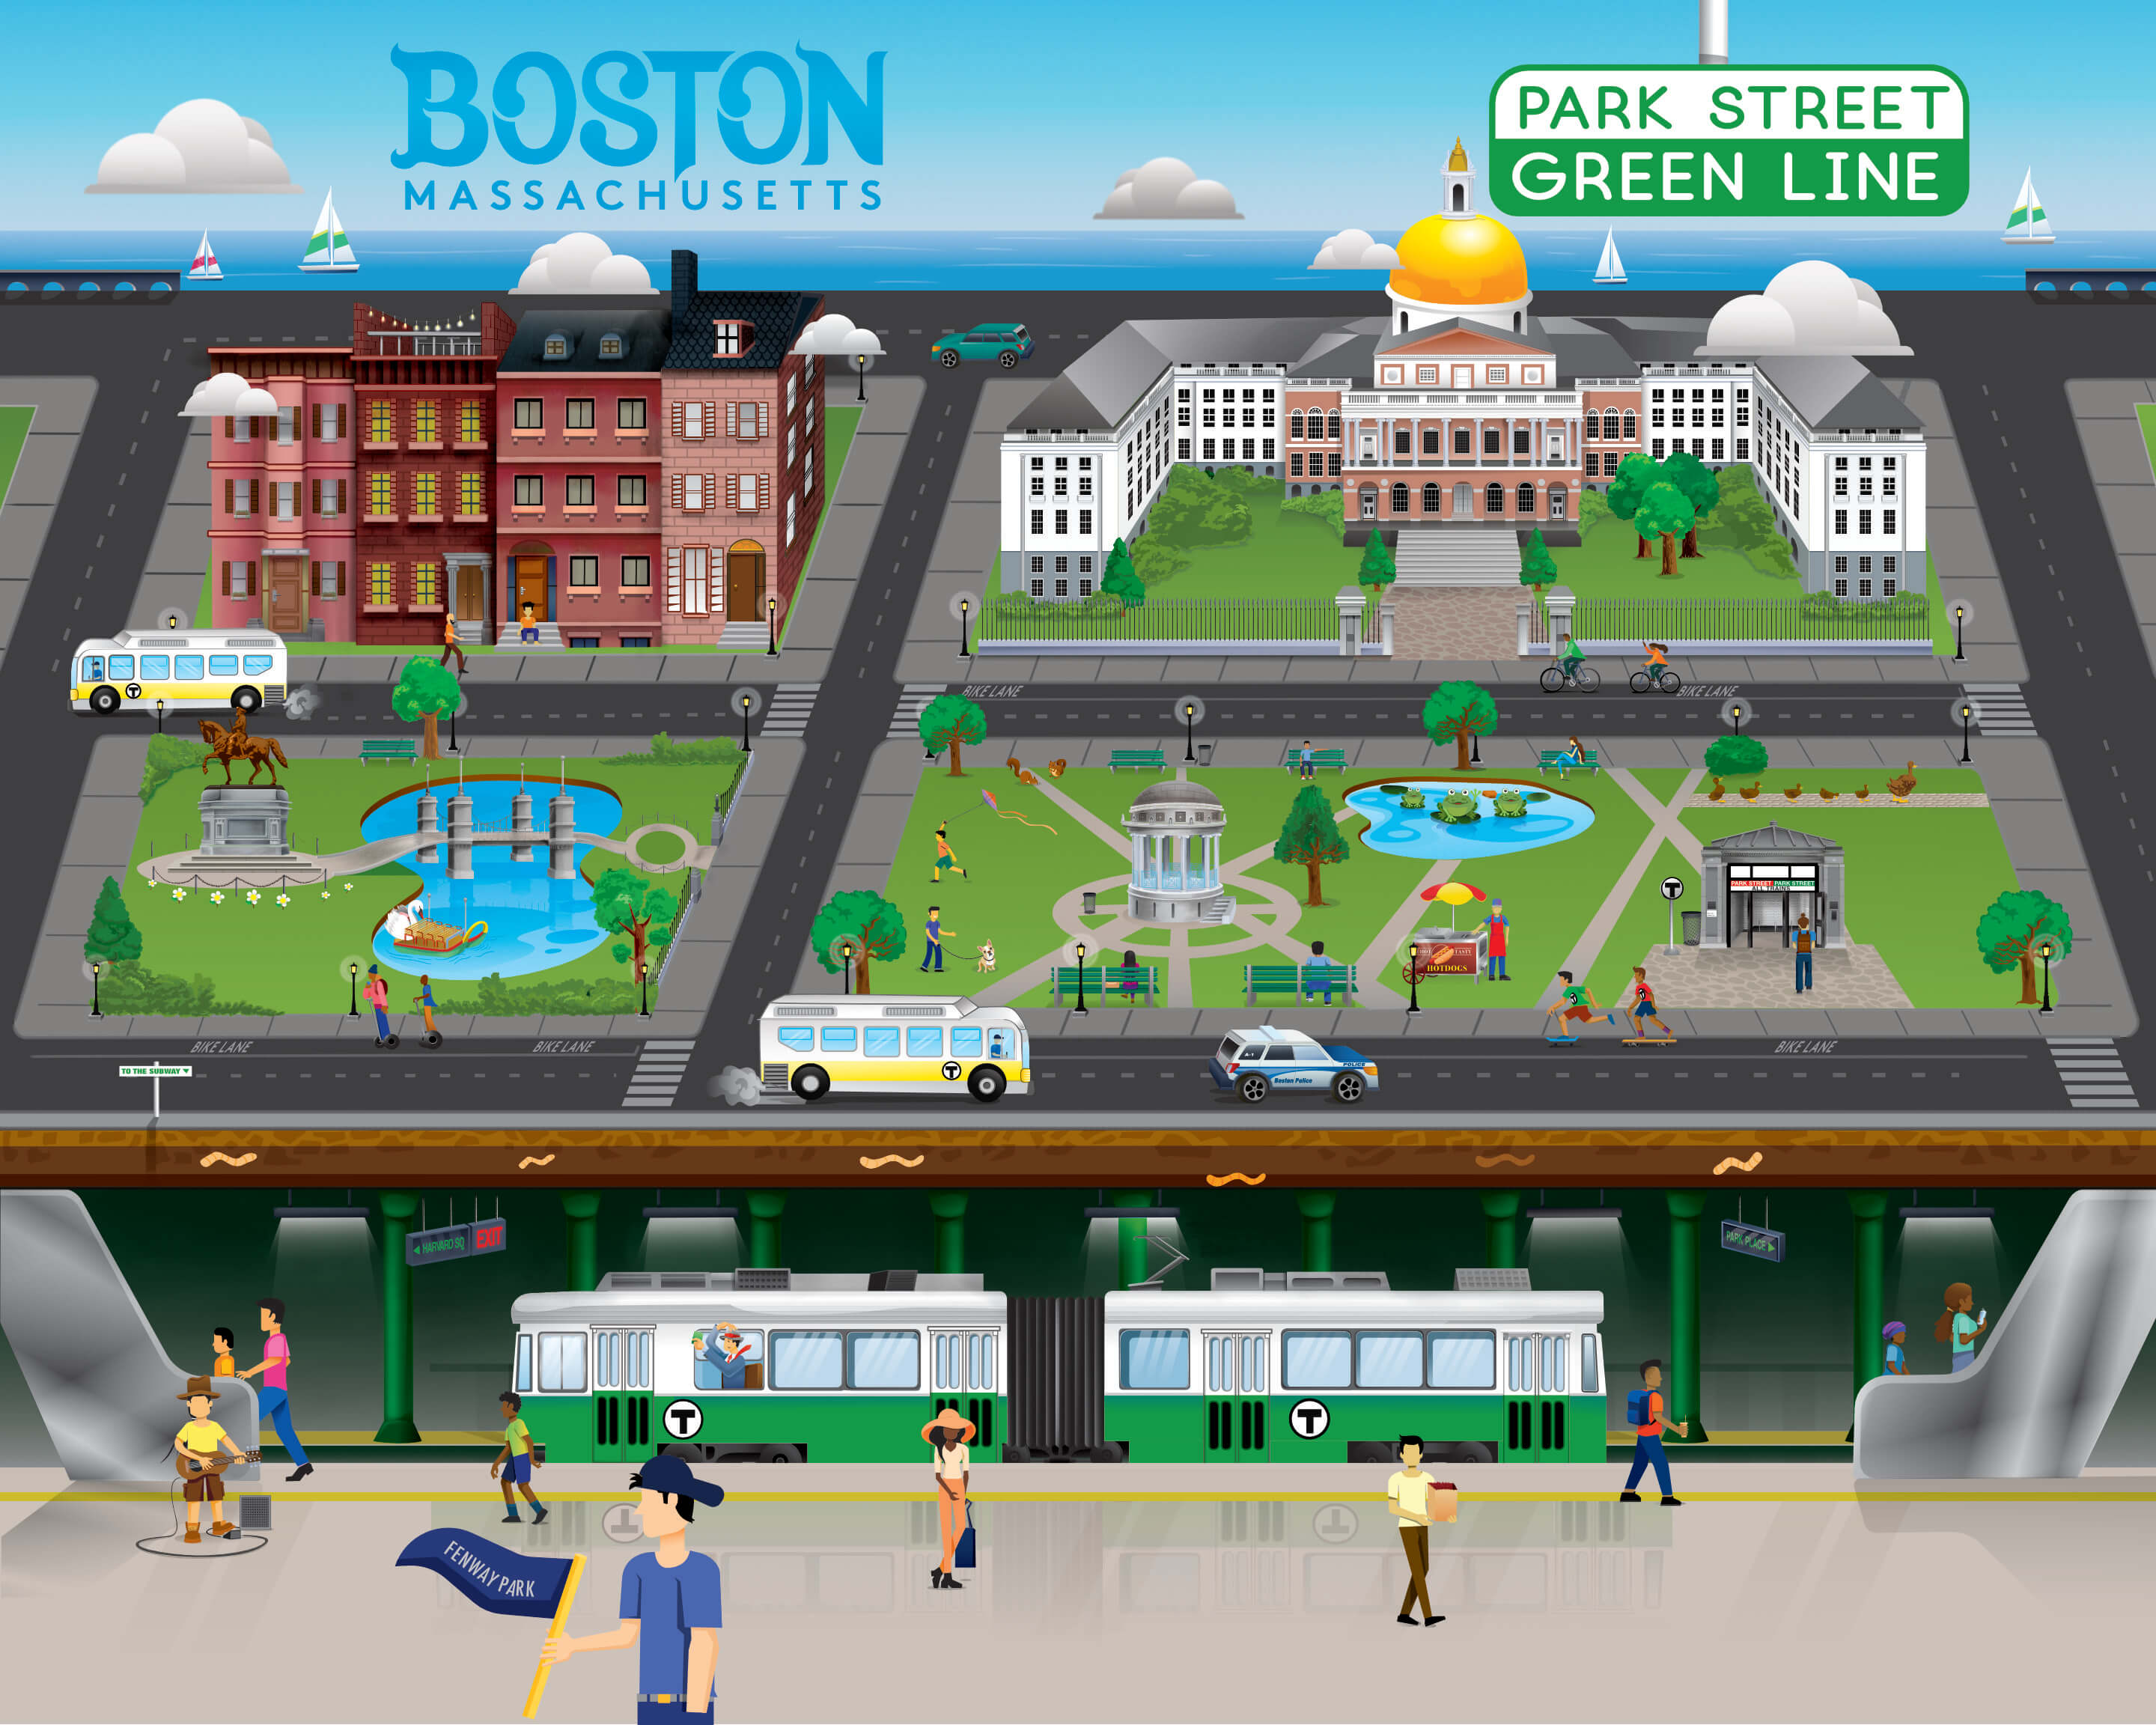 fun jigsaw puzzle illustration of Boston Common and the Green Line Park Street Station